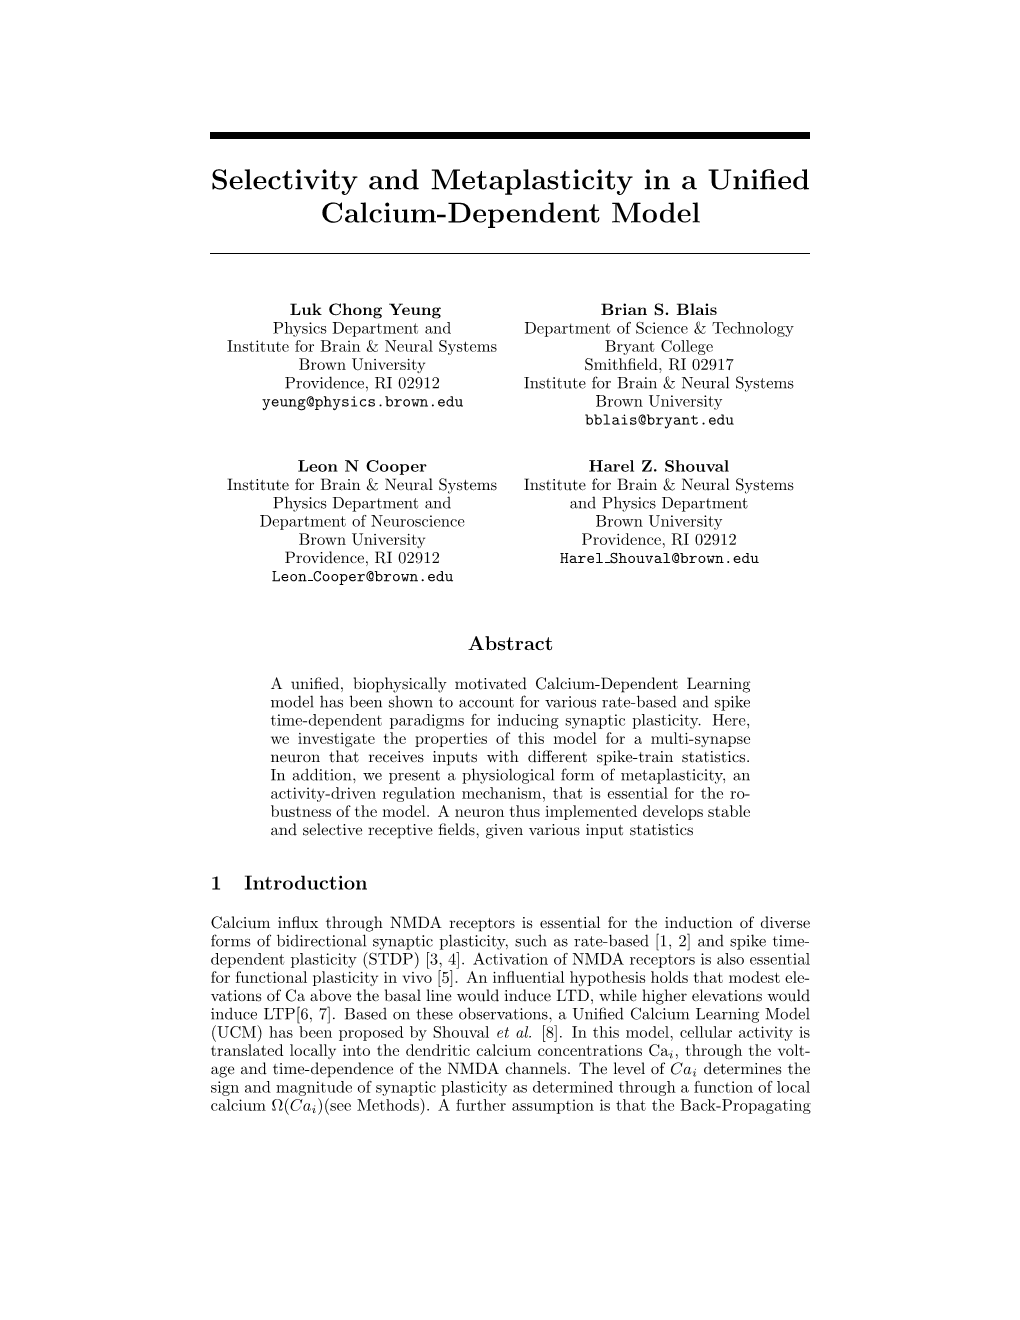 Selectivity and Metaplasticity in a Unified Calcium-Dependent Model